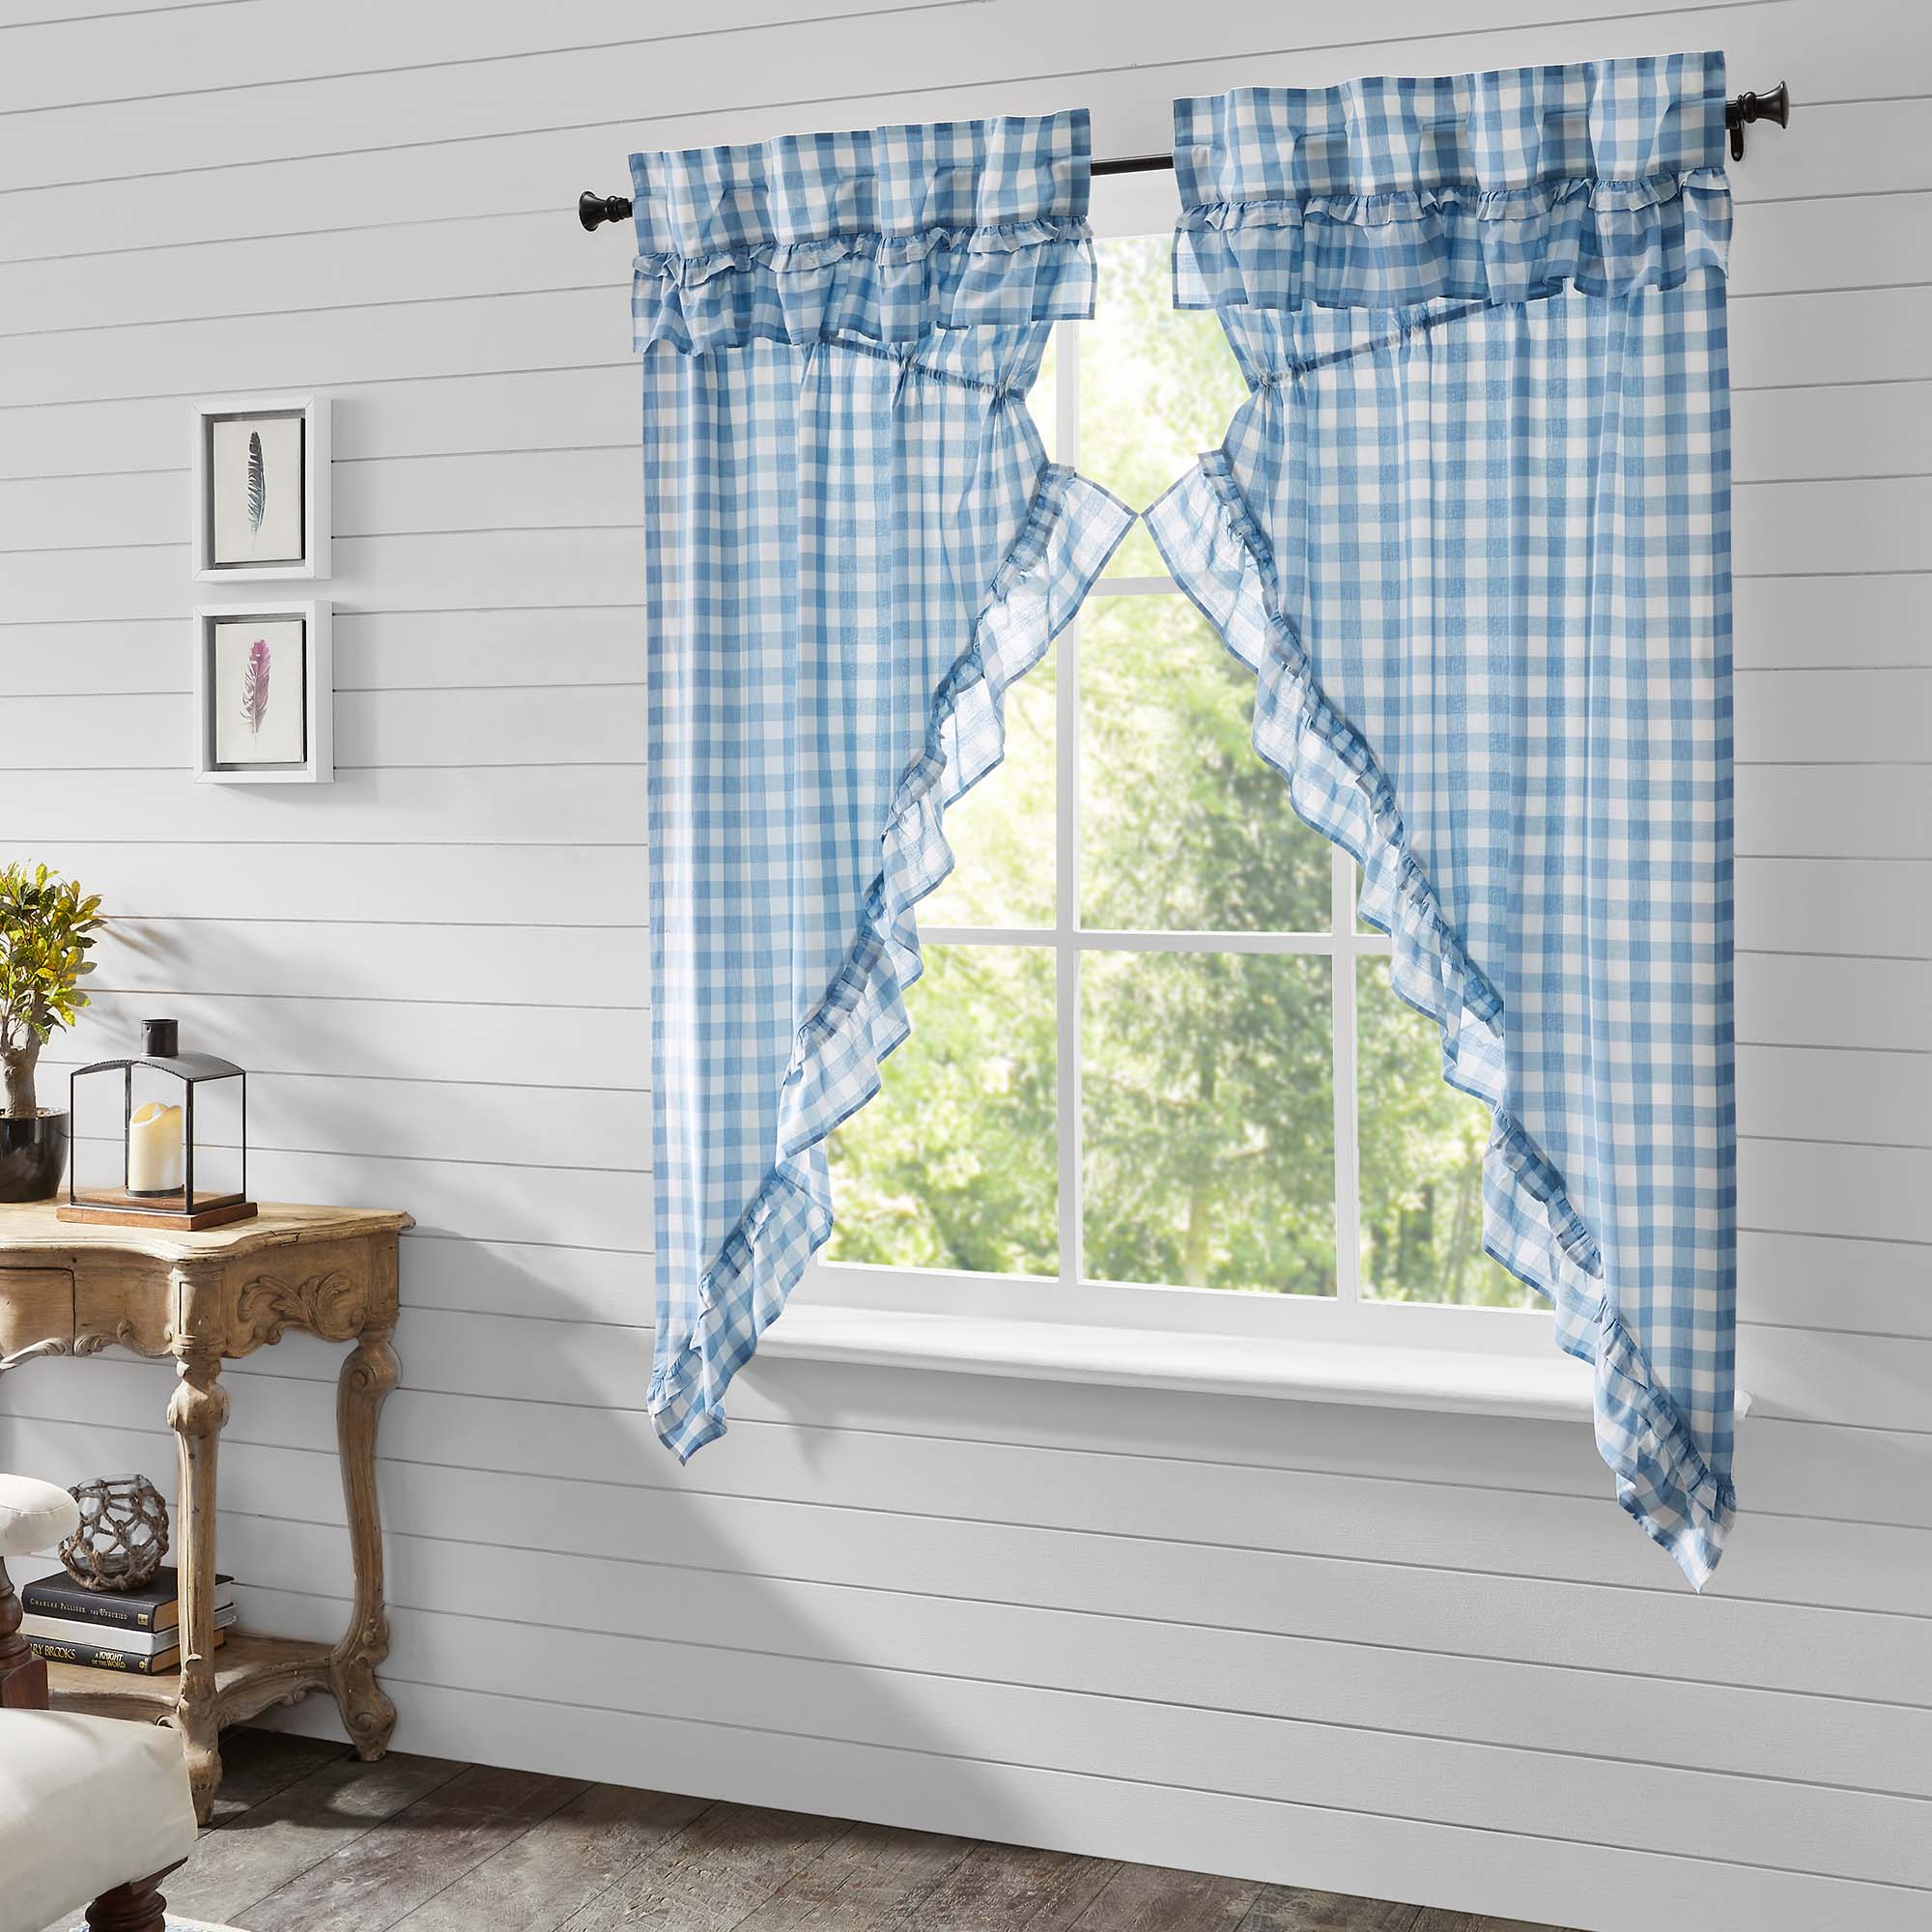 April & Olive Annie Buffalo Blue Check Ruffled Prairie Short Panel Set of 2 63x36x18 By VHC Brands